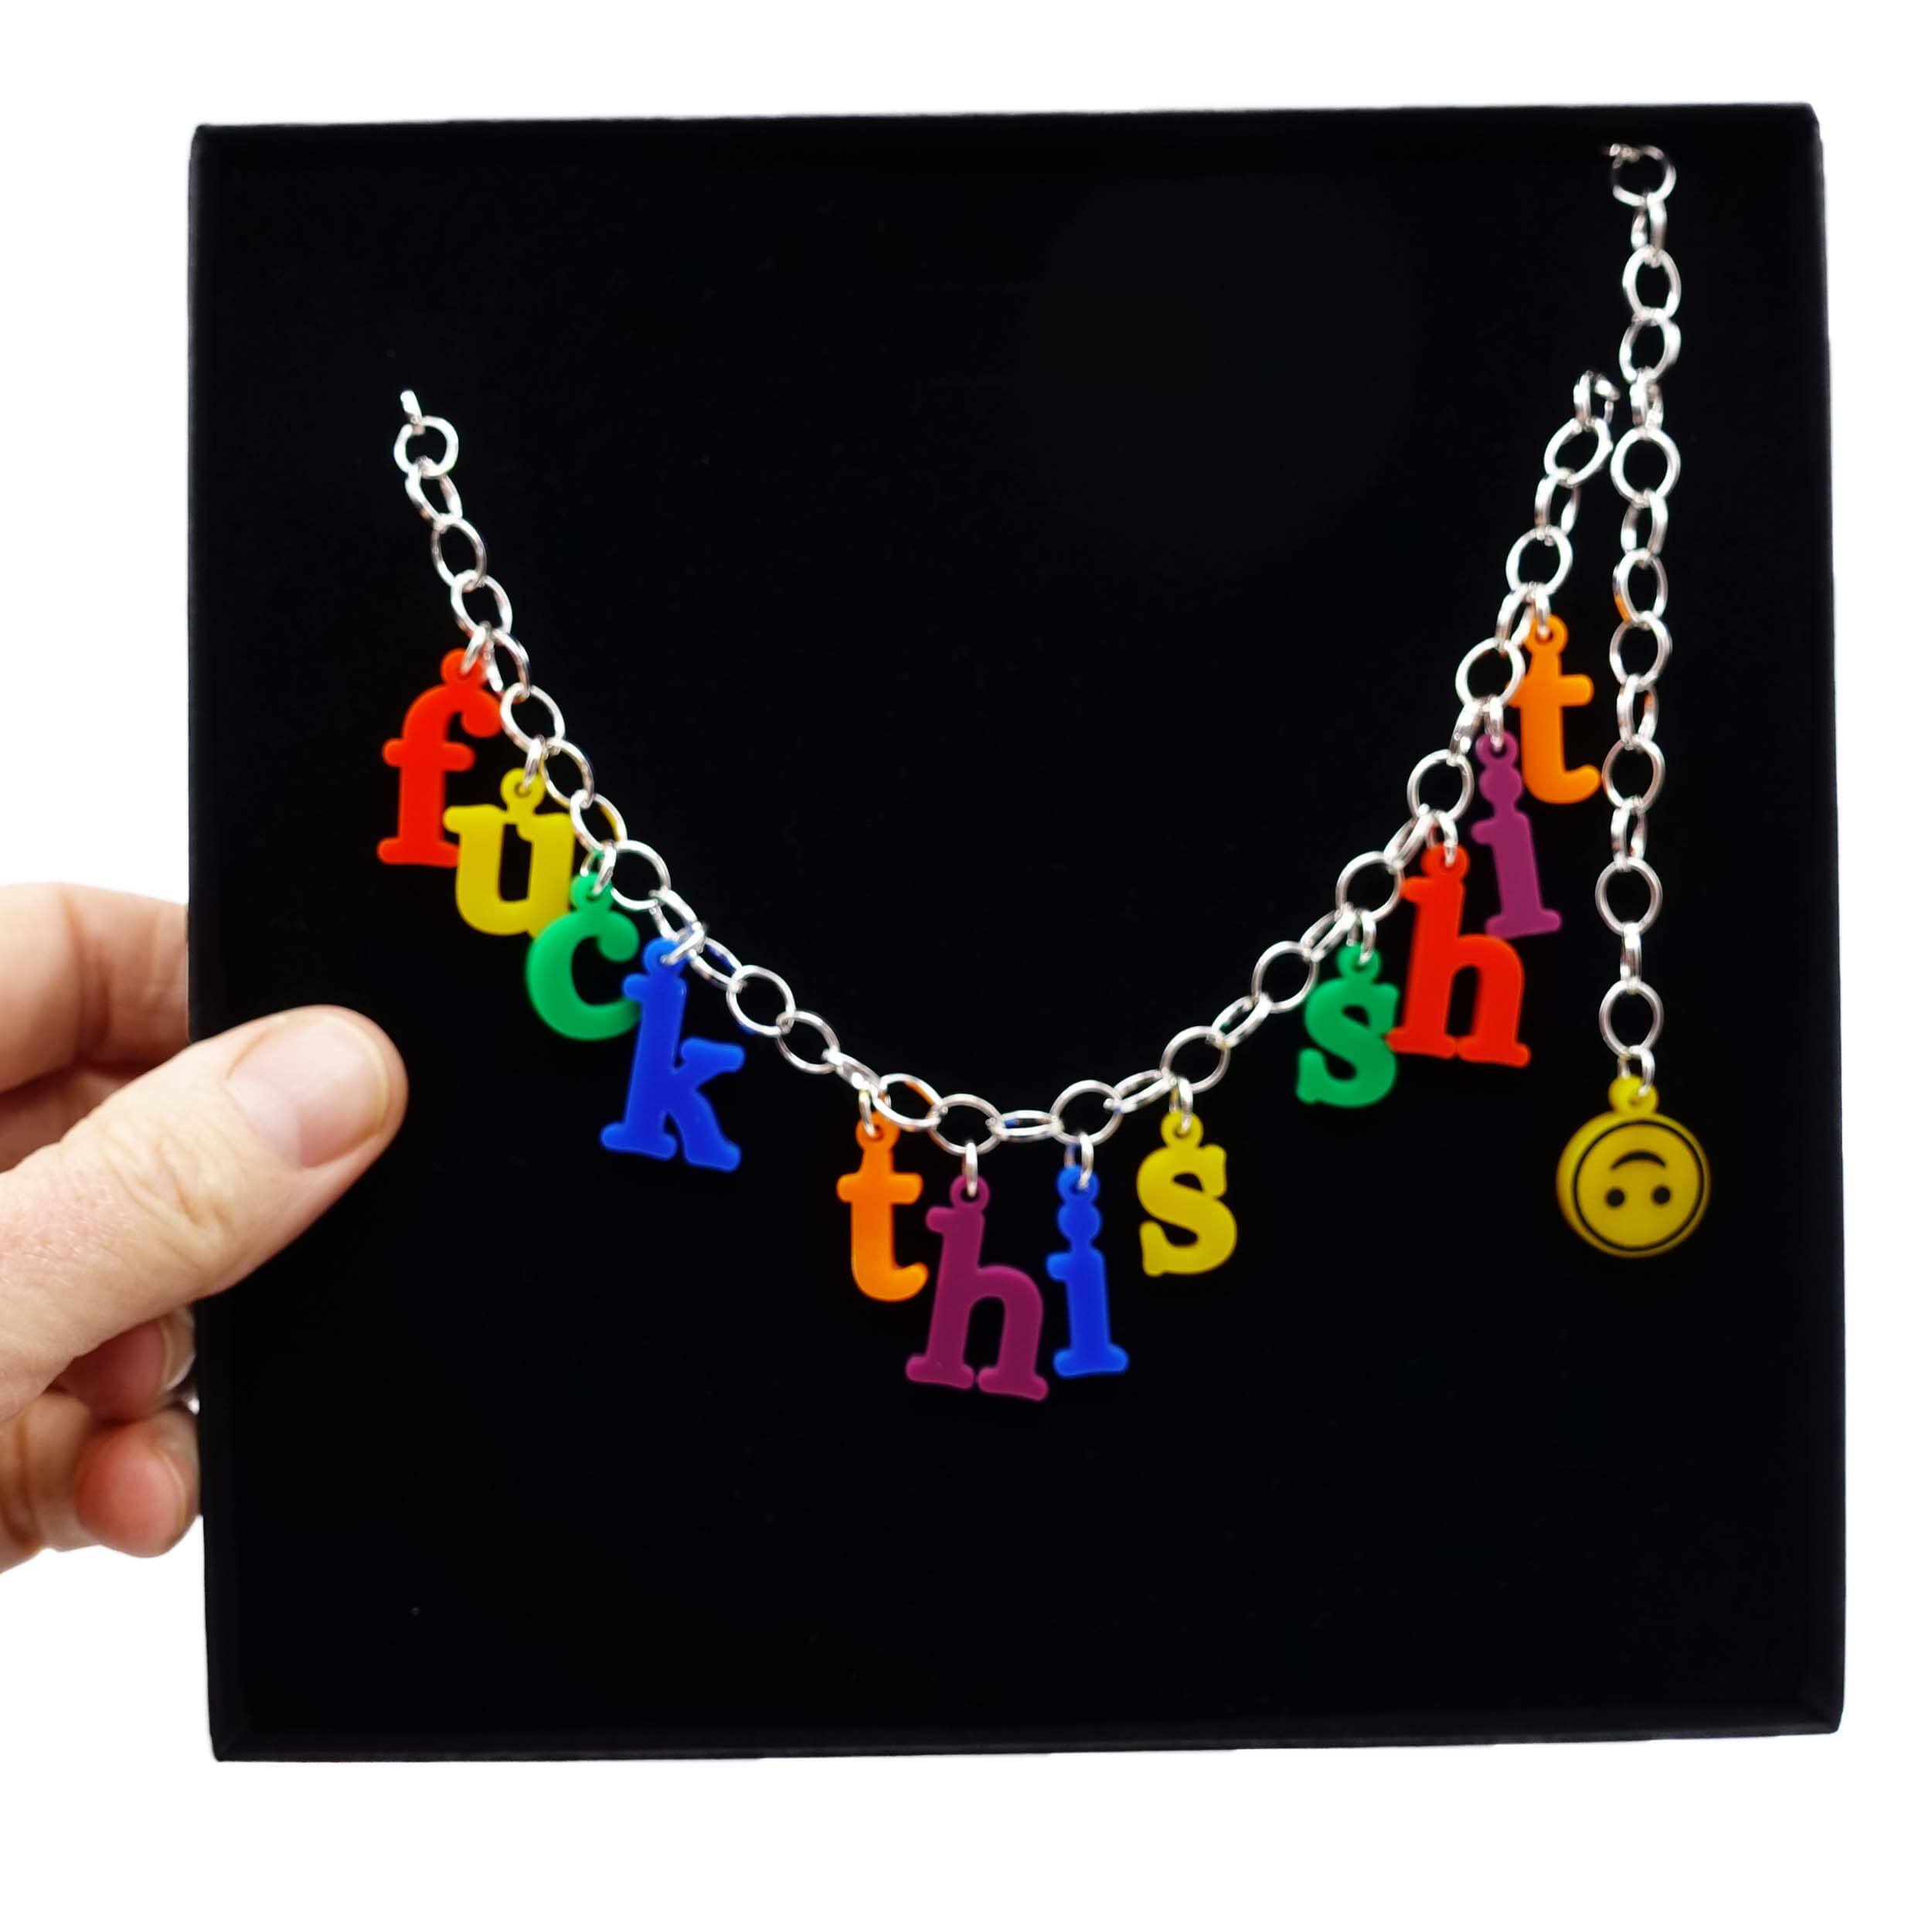 F*ck this sh*t necklace in retro alphabet letters designed by Sarah Day for Wear and Resist. Shown in a classy gift box. 